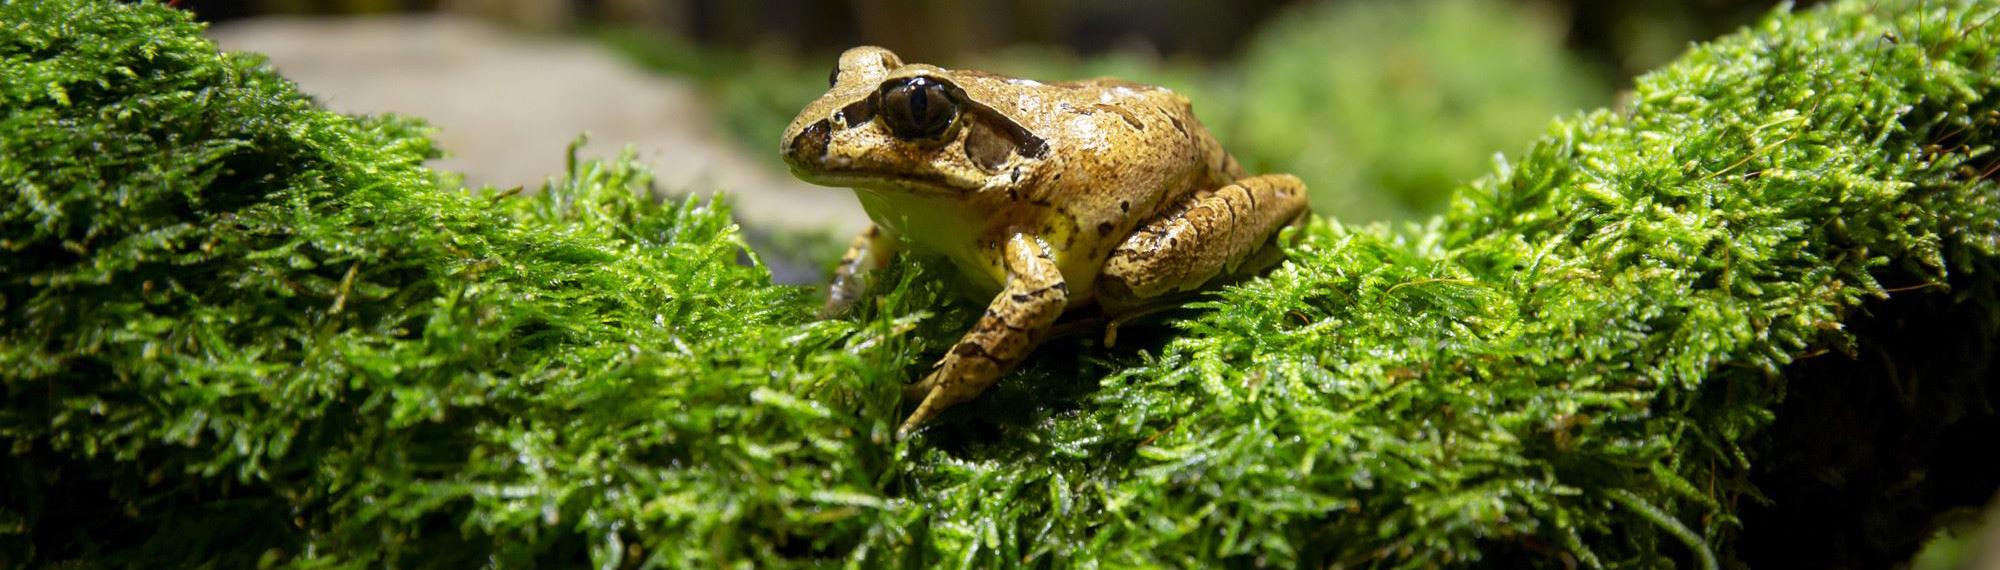 Southern Barred Frog sitting on green moss; frog is a golden brown colour with a black stripe through its eye.